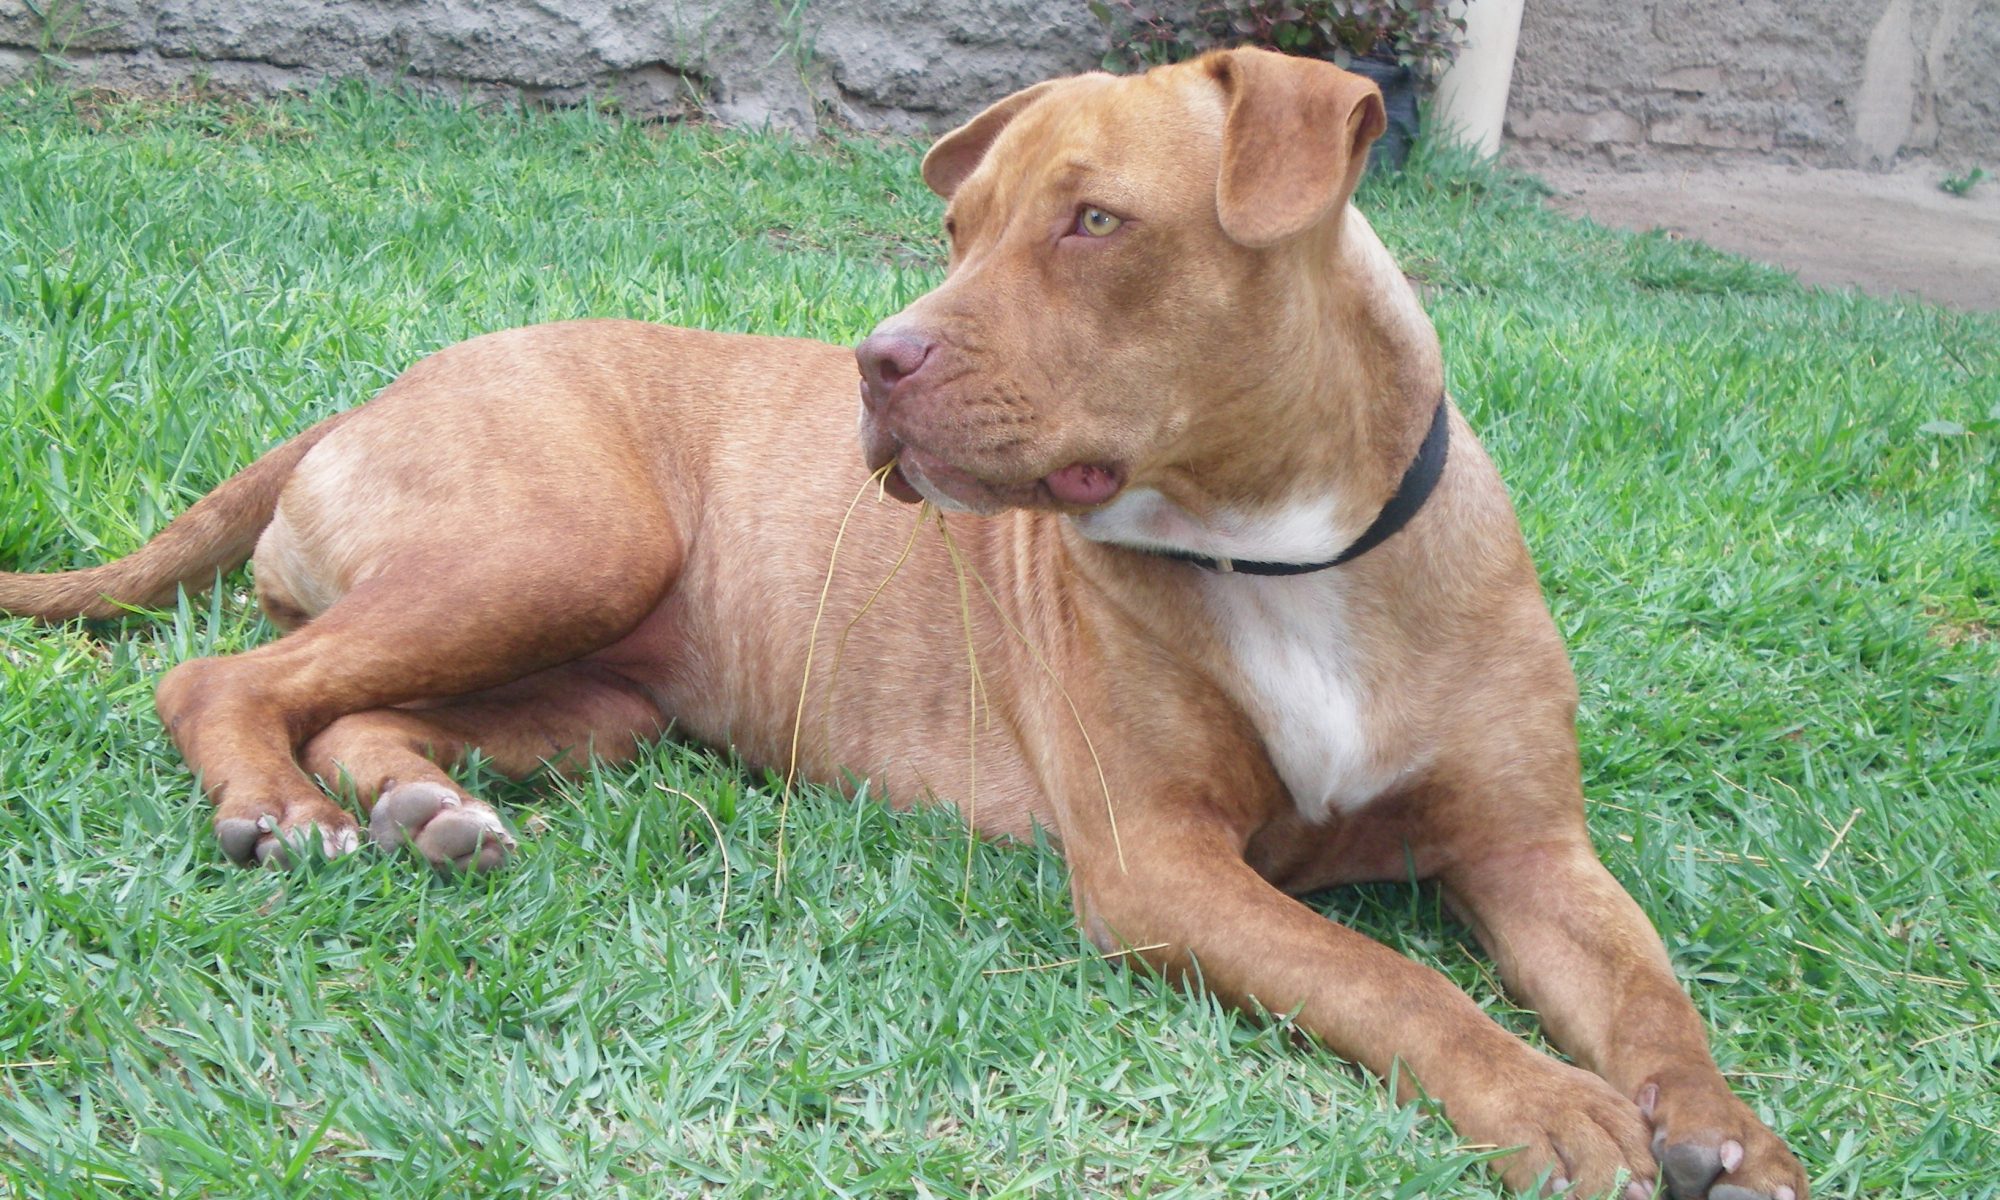 What Care Does Your Dog Pitbull Need? Have a Happy, Healthy and Balanced Dog